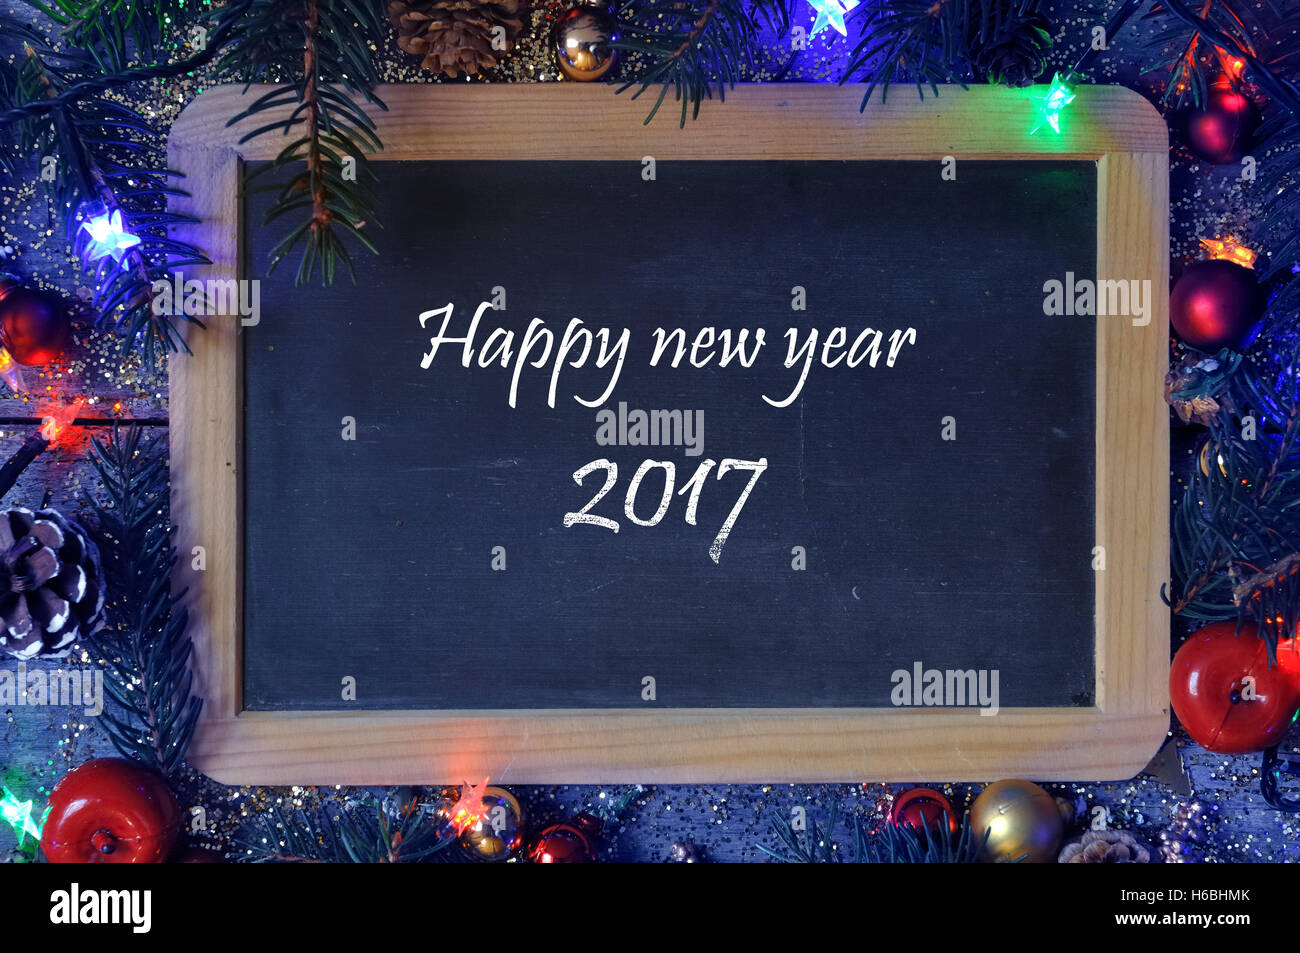 Happy new year 2017 written on a slate on Christmas decoration Stock Photo